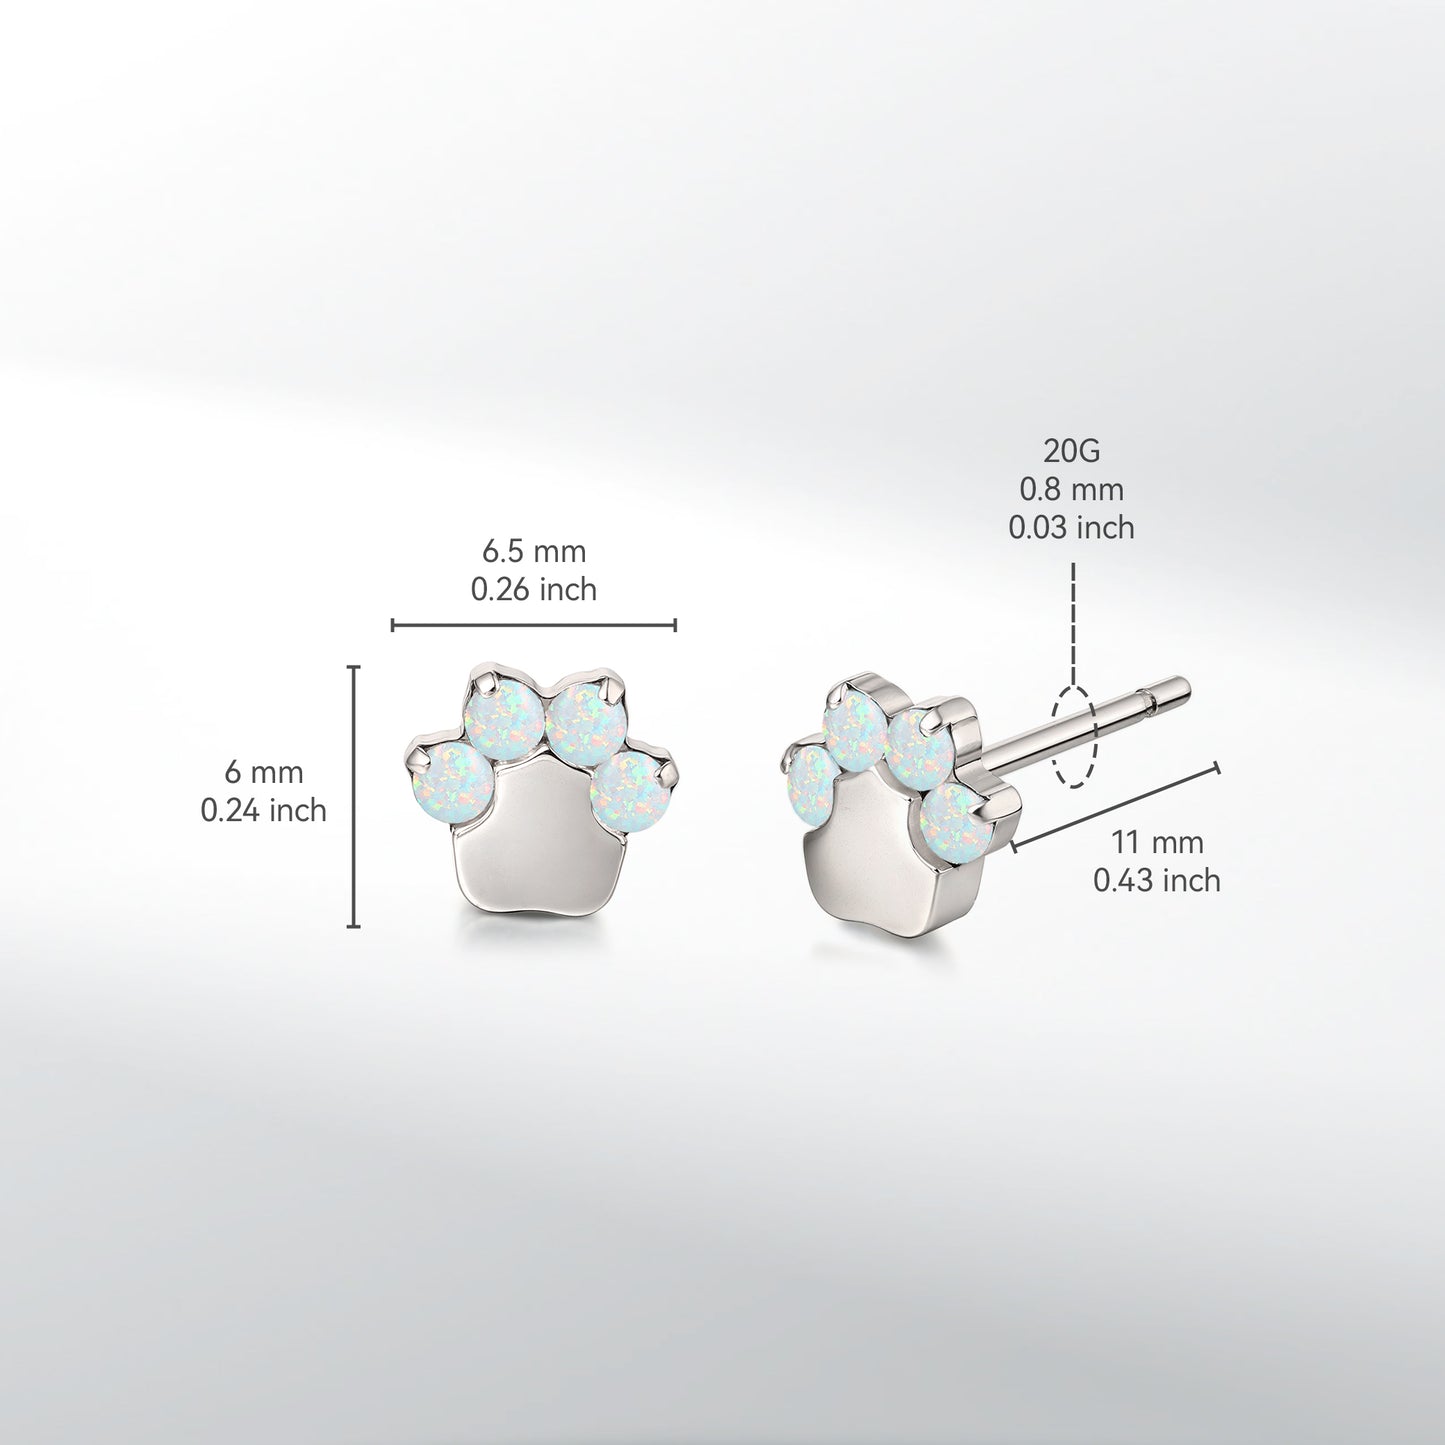 Limerencia G23 Pure Titanium Hypoallergenic Earrings | Cat Paws OPAL F136 Implant Grade Titanium Jewelry for Sensitive Ears